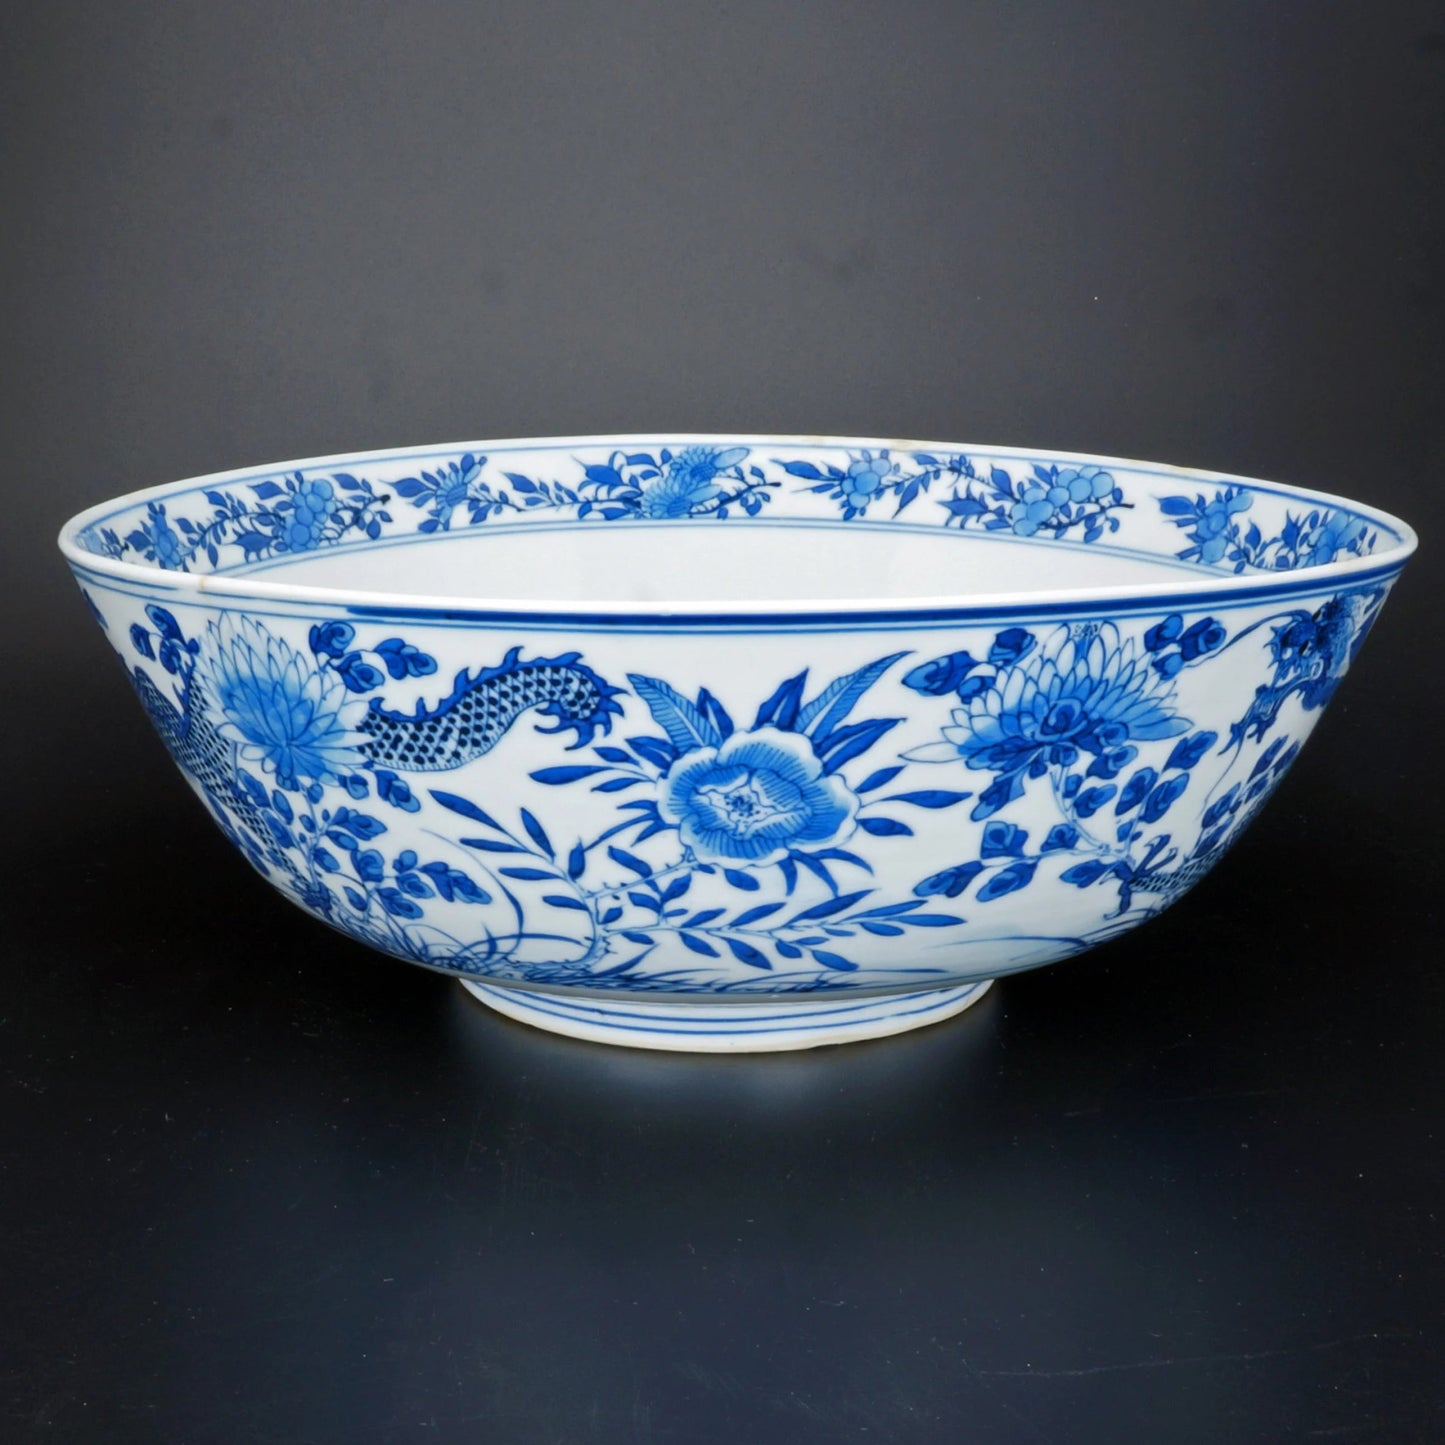 Chinese Large Blue and White Bowl Kangxi Reign Mark 19th Century - Bear and Raven Antiques